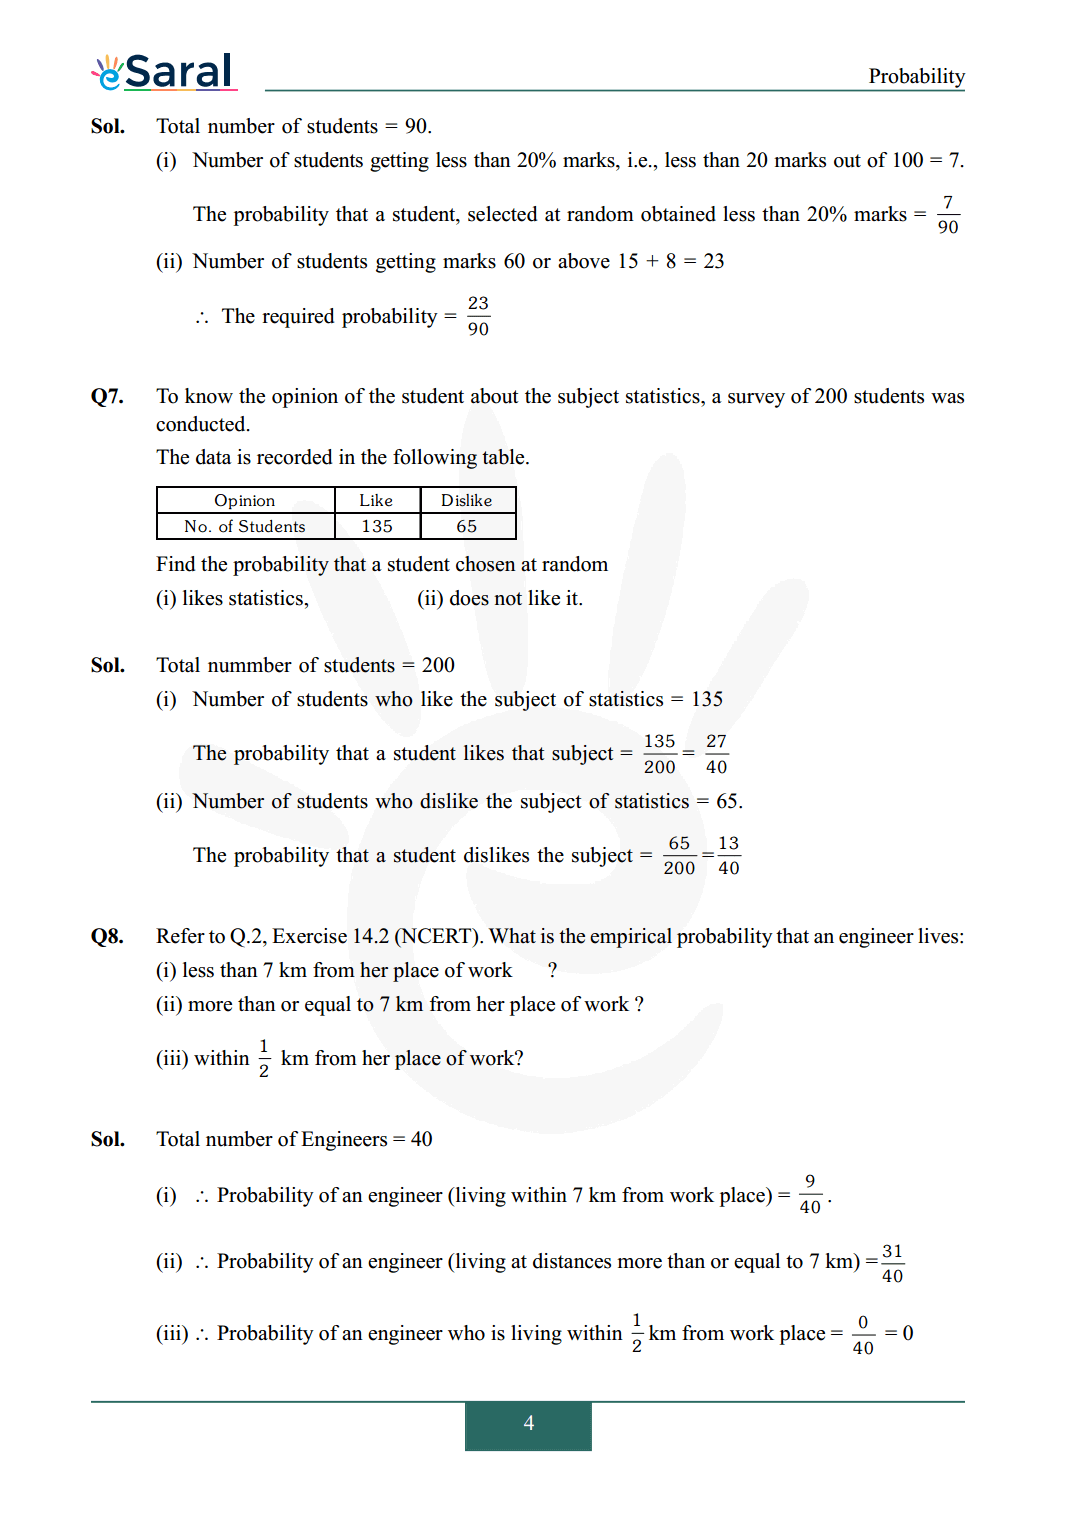 Class 9 maths chapter 15 exercise 15.1 solutions Image 4